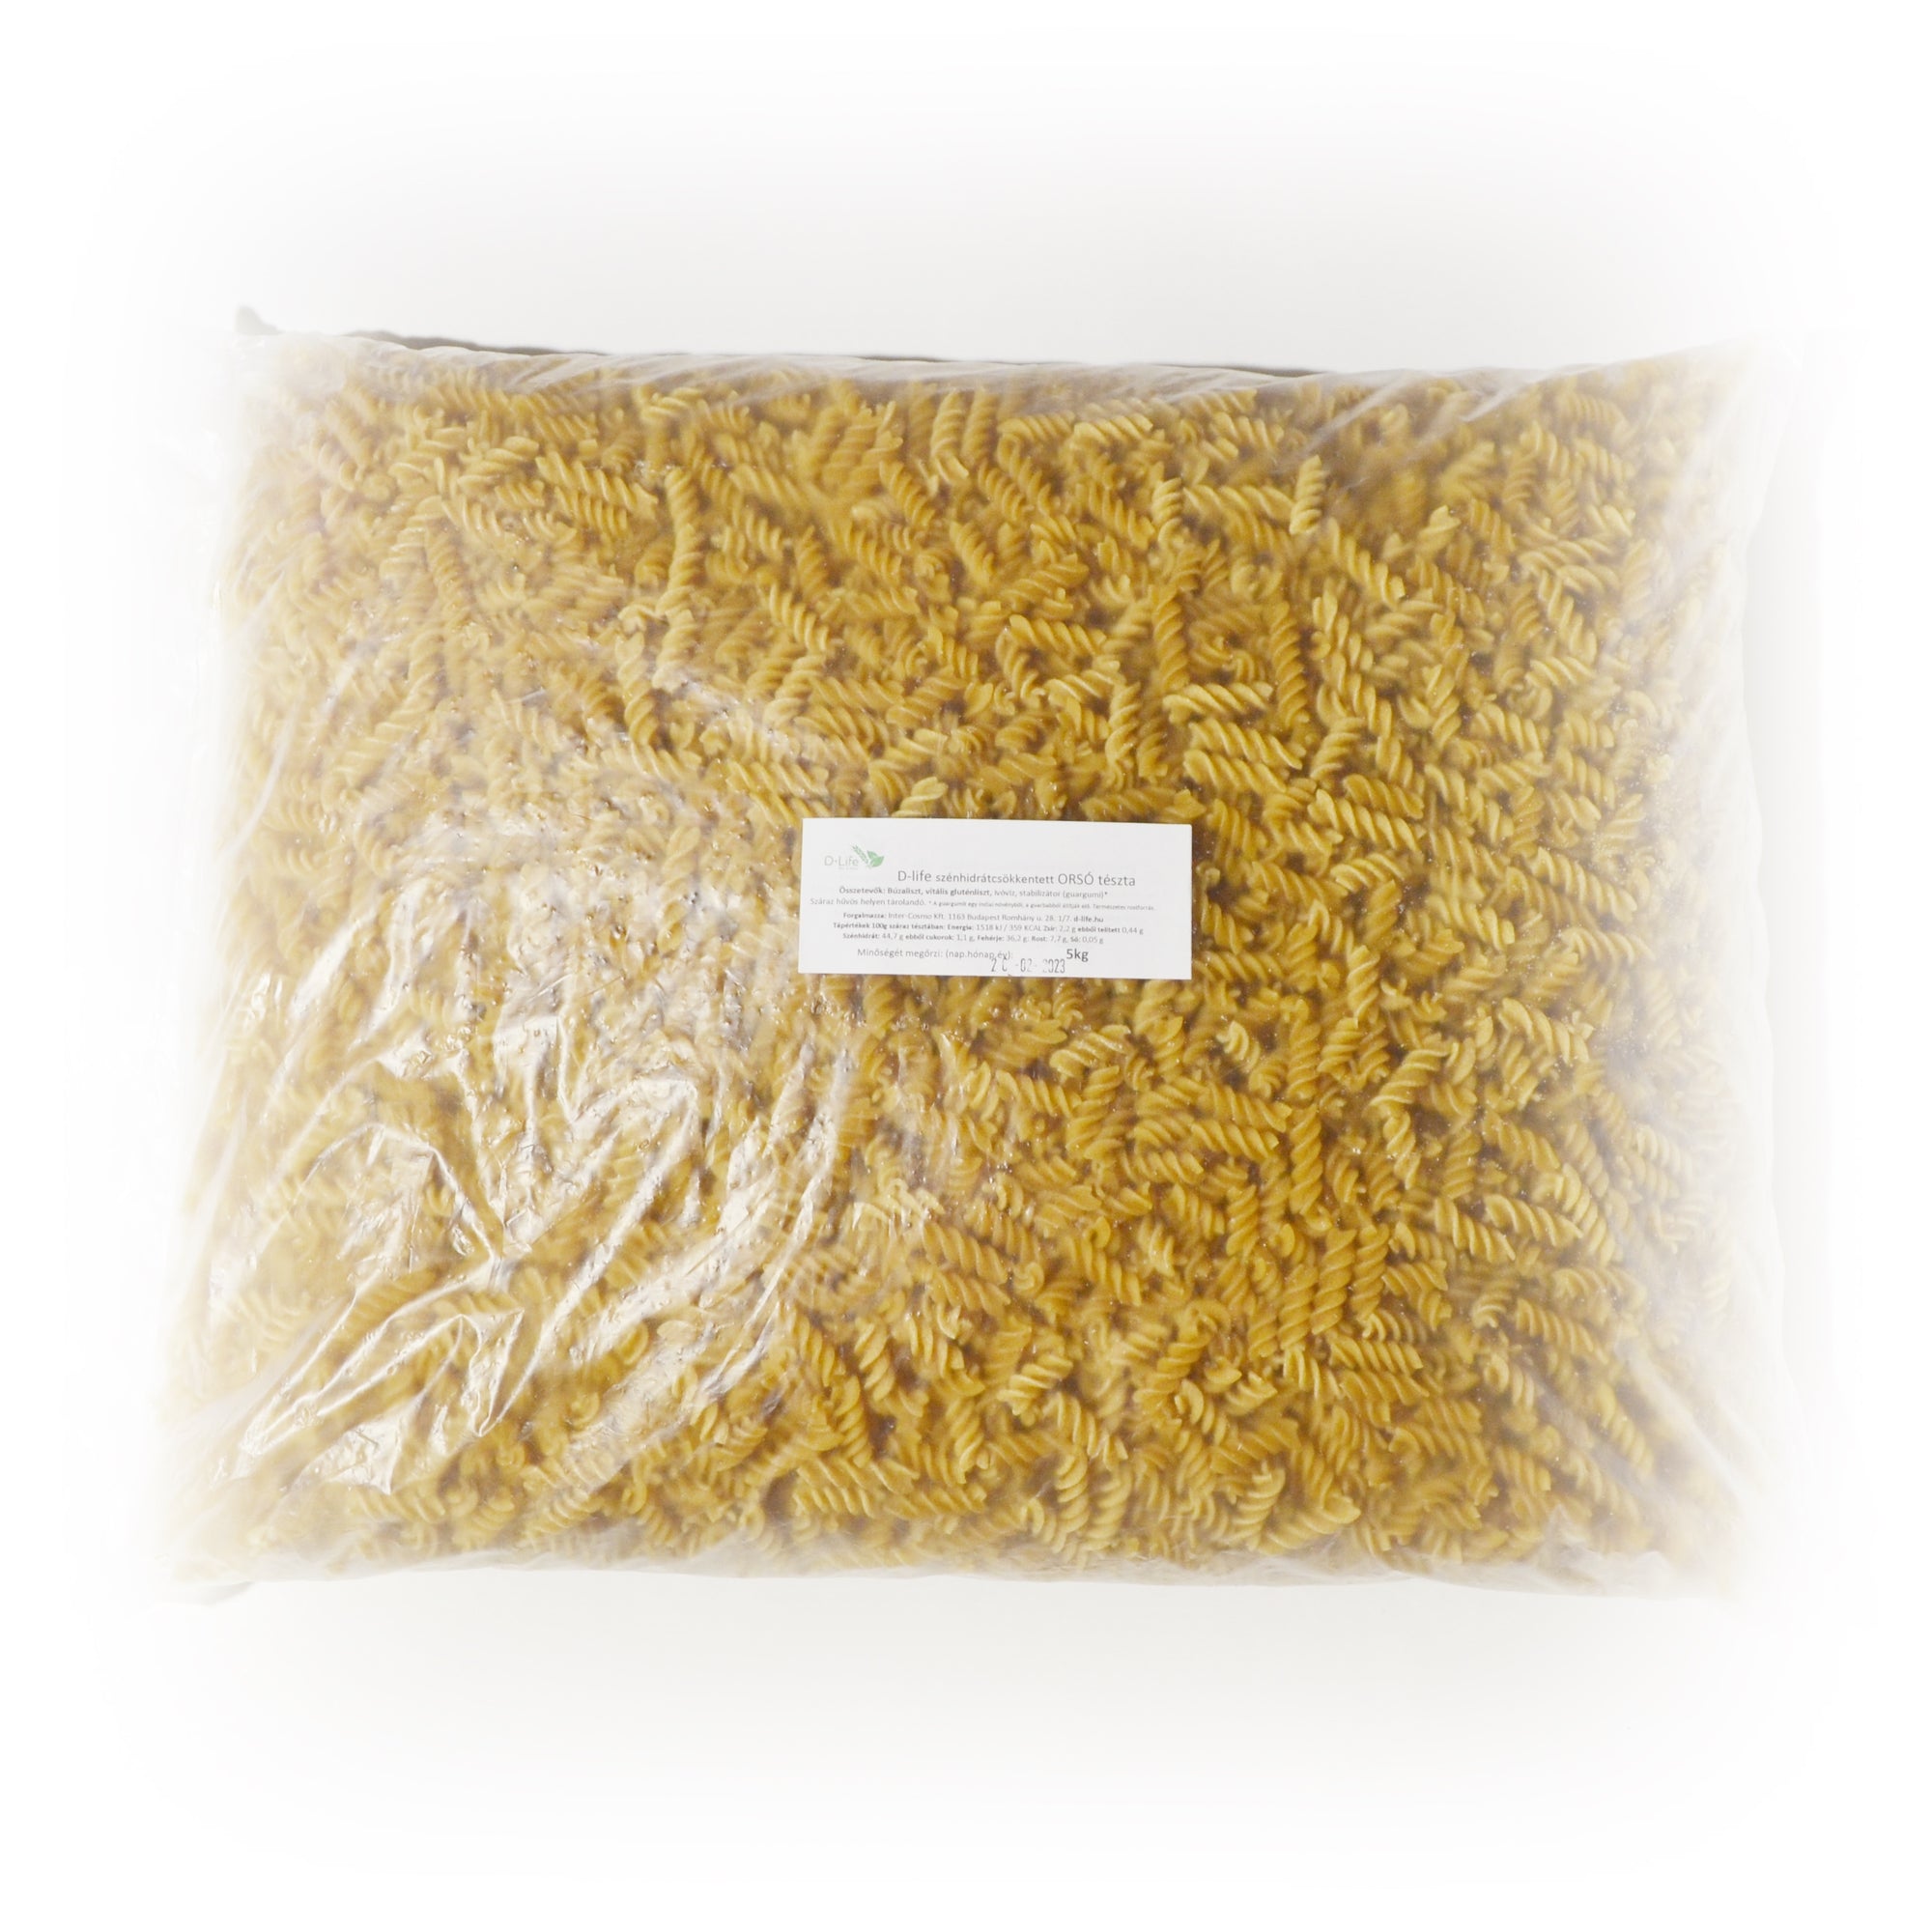 D-life low-carbohydrate spindle pasta gastro 5kg sale